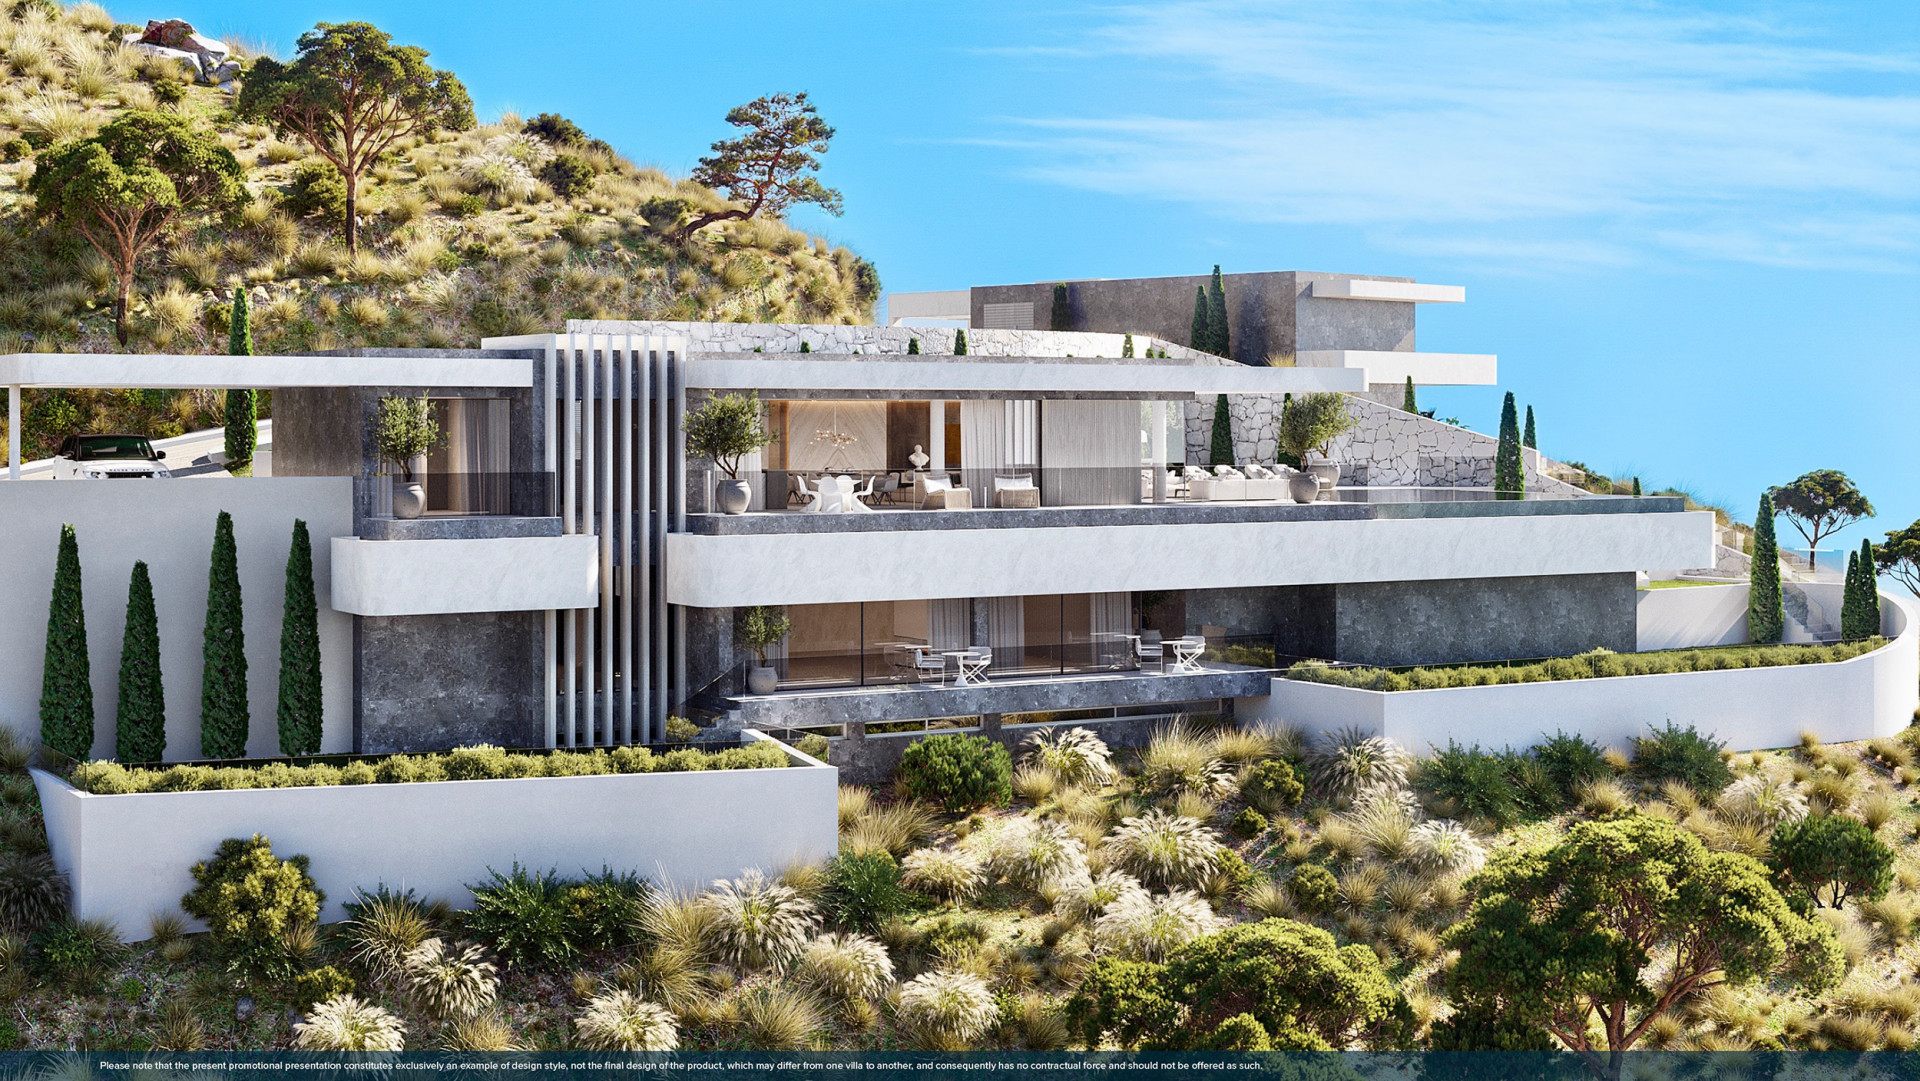 Sustainable luxury development of 18 individually designed villas situated in the 200-hectare country club estate of Real de La Quinta